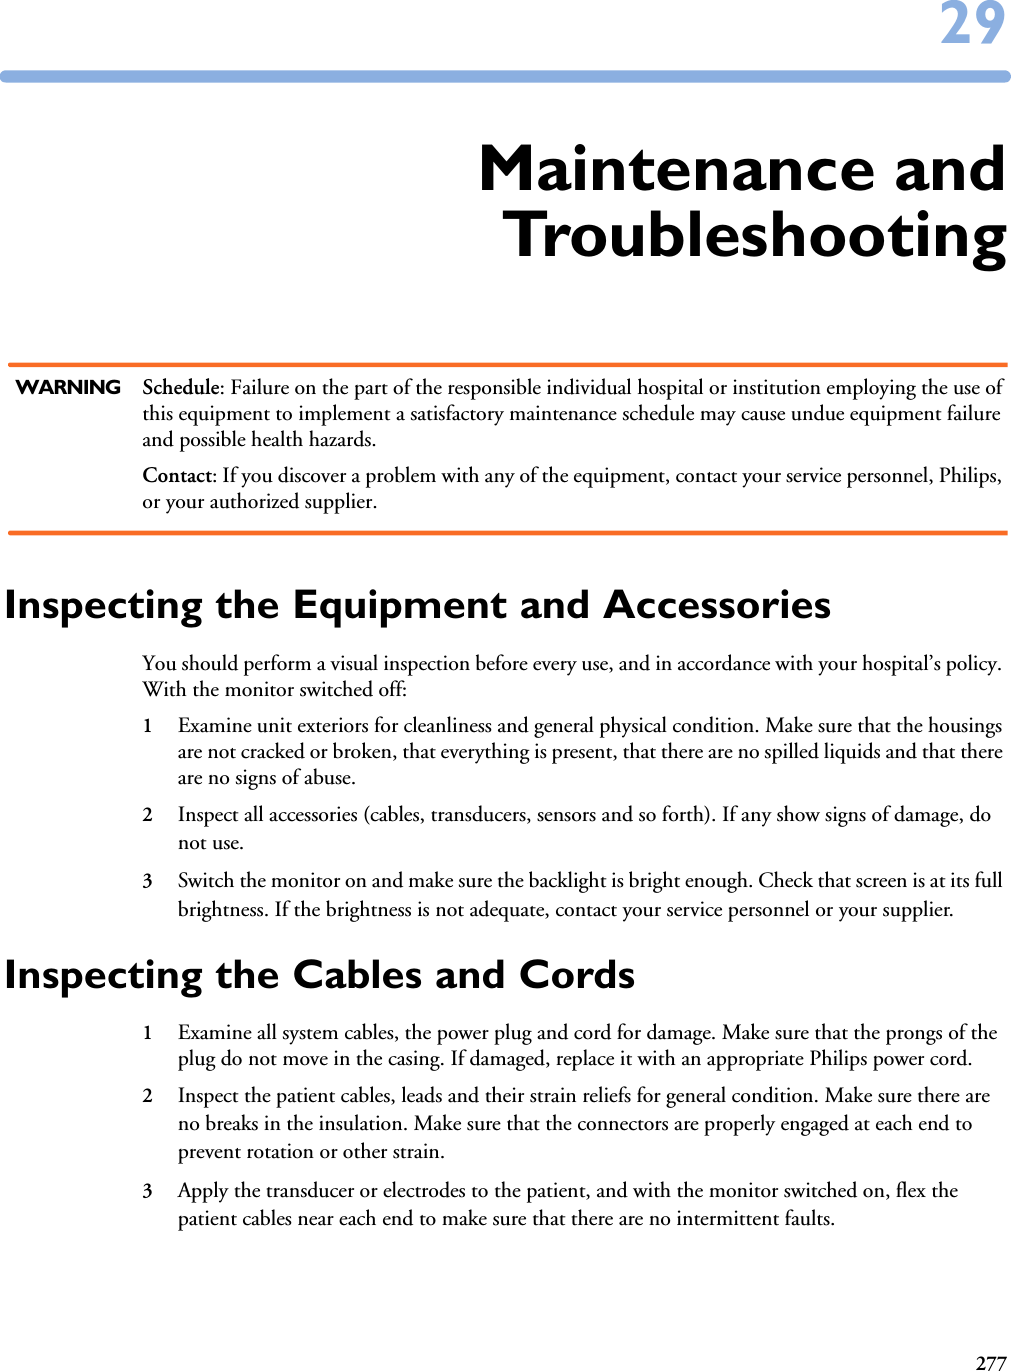 2772929Maintenance andTroubleshootingWARNING Schedule: Failure on the part of the responsible individual hospital or institution employing the use of this equipment to implement a satisfactory maintenance schedule may cause undue equipment failure and possible health hazards.Contact: If you discover a problem with any of the equipment, contact your service personnel, Philips, or your authorized supplier.Inspecting the Equipment and AccessoriesYou should perform a visual inspection before every use, and in accordance with your hospital’s policy. With the monitor switched off:1Examine unit exteriors for cleanliness and general physical condition. Make sure that the housings are not cracked or broken, that everything is present, that there are no spilled liquids and that there are no signs of abuse.2Inspect all accessories (cables, transducers, sensors and so forth). If any show signs of damage, do not use.3Switch the monitor on and make sure the backlight is bright enough. Check that screen is at its full brightness. If the brightness is not adequate, contact your service personnel or your supplier.Inspecting the Cables and Cords1Examine all system cables, the power plug and cord for damage. Make sure that the prongs of the plug do not move in the casing. If damaged, replace it with an appropriate Philips power cord.2Inspect the patient cables, leads and their strain reliefs for general condition. Make sure there are no breaks in the insulation. Make sure that the connectors are properly engaged at each end to prevent rotation or other strain.3Apply the transducer or electrodes to the patient, and with the monitor switched on, flex the patient cables near each end to make sure that there are no intermittent faults.